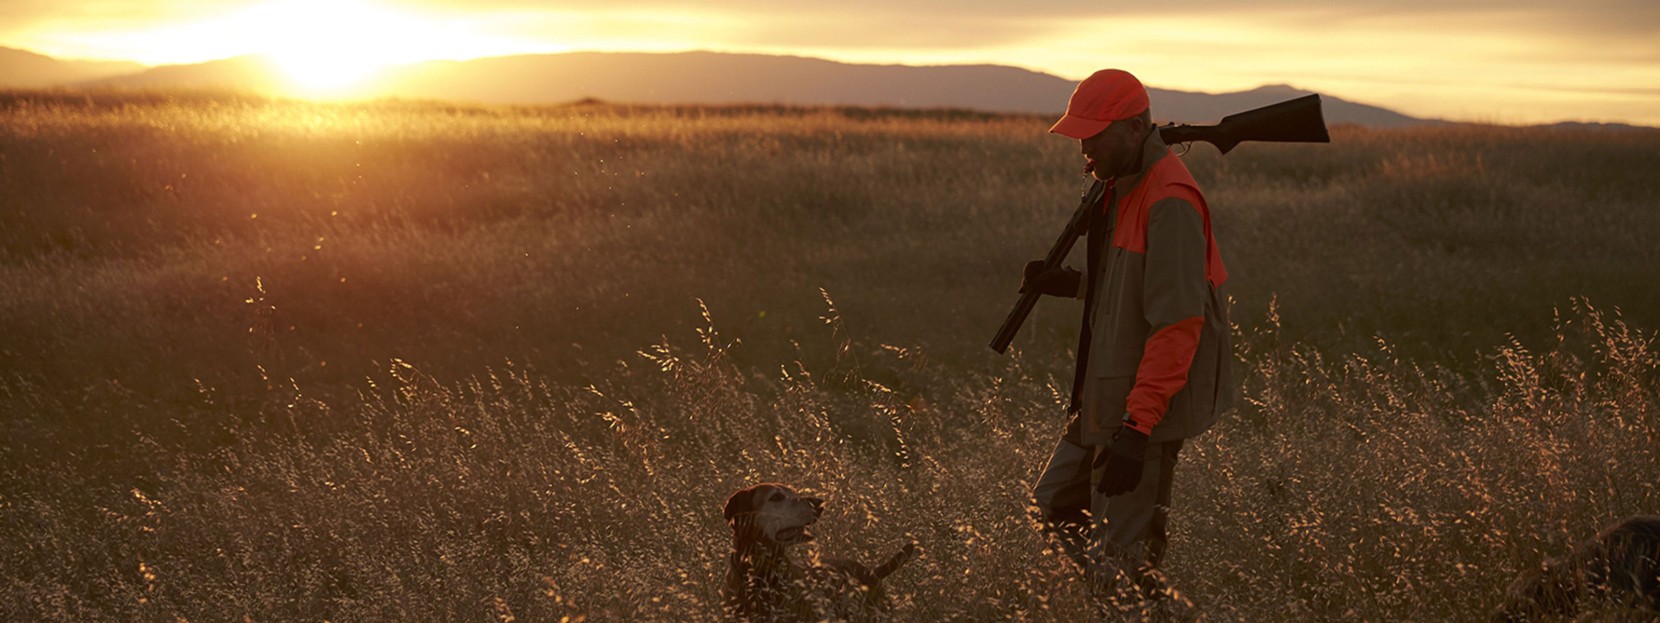 A Hunter walking in a field with his dog.